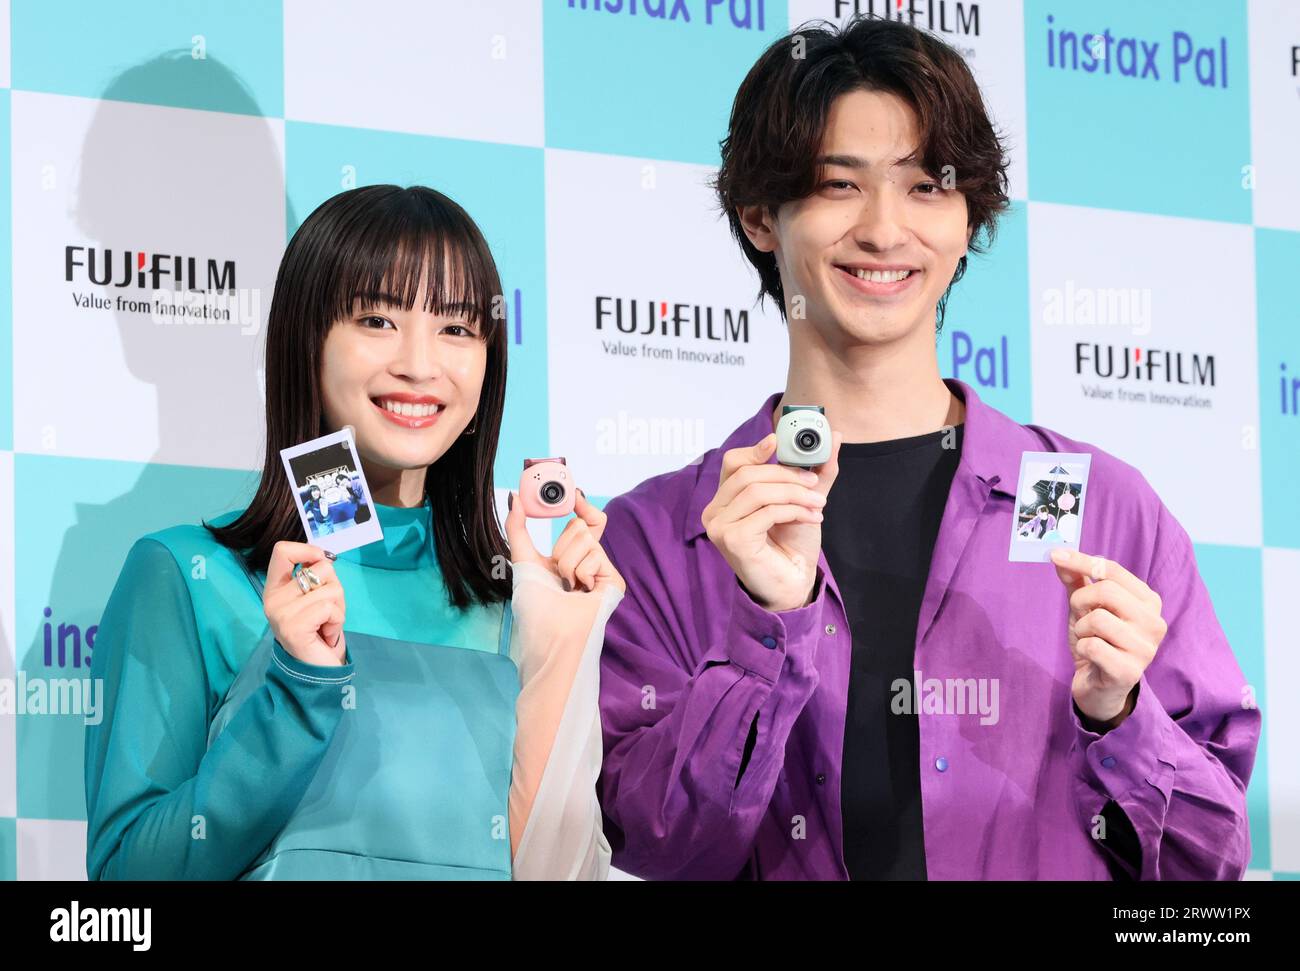 Tokyo, Japan. 21st Sep, 2023. Japanese actor Ryusei Yokohama (R) and actress Suzu Hirose (L) attend a promotional event of Fujifilm's new tiny digital camera 'Instax Pal' which enables to connect with smart phone or instant photo printer in Tokyo on Thursday, September 21, 2023. The Instax Pal which has a wide angle lens equibalent to 16mm in 35mm camera will go on sale on October 5. (photo by Yoshio Tsunoda/AFLO) Stock Photo